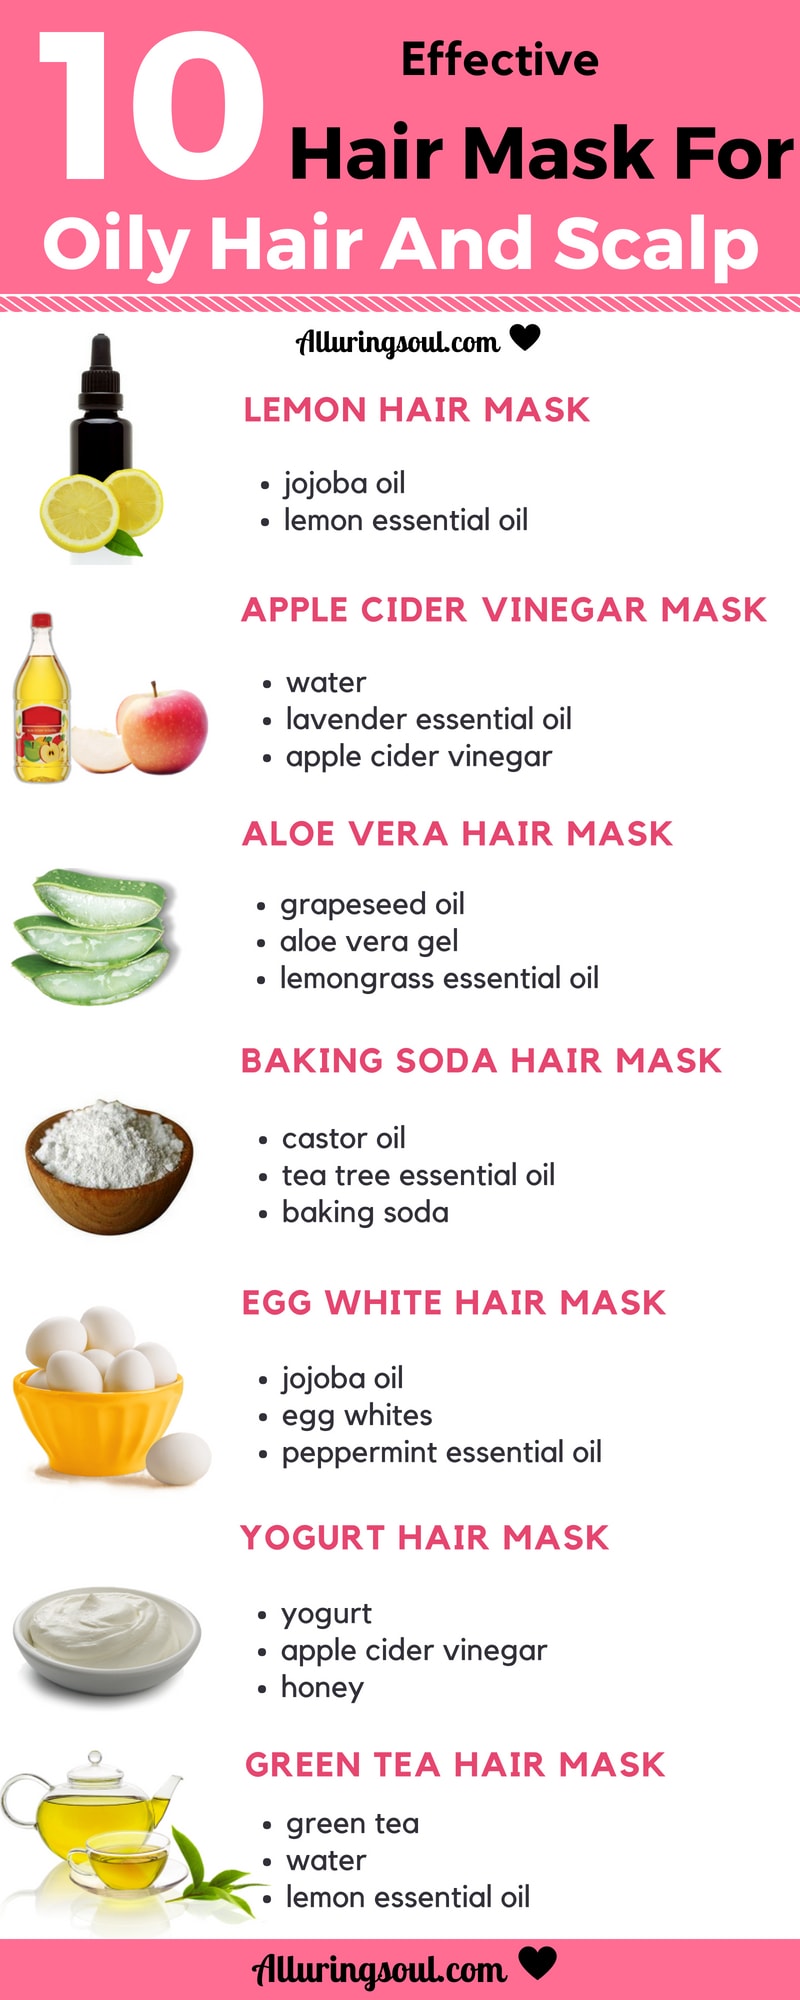 hair mask for oily hair and scalp